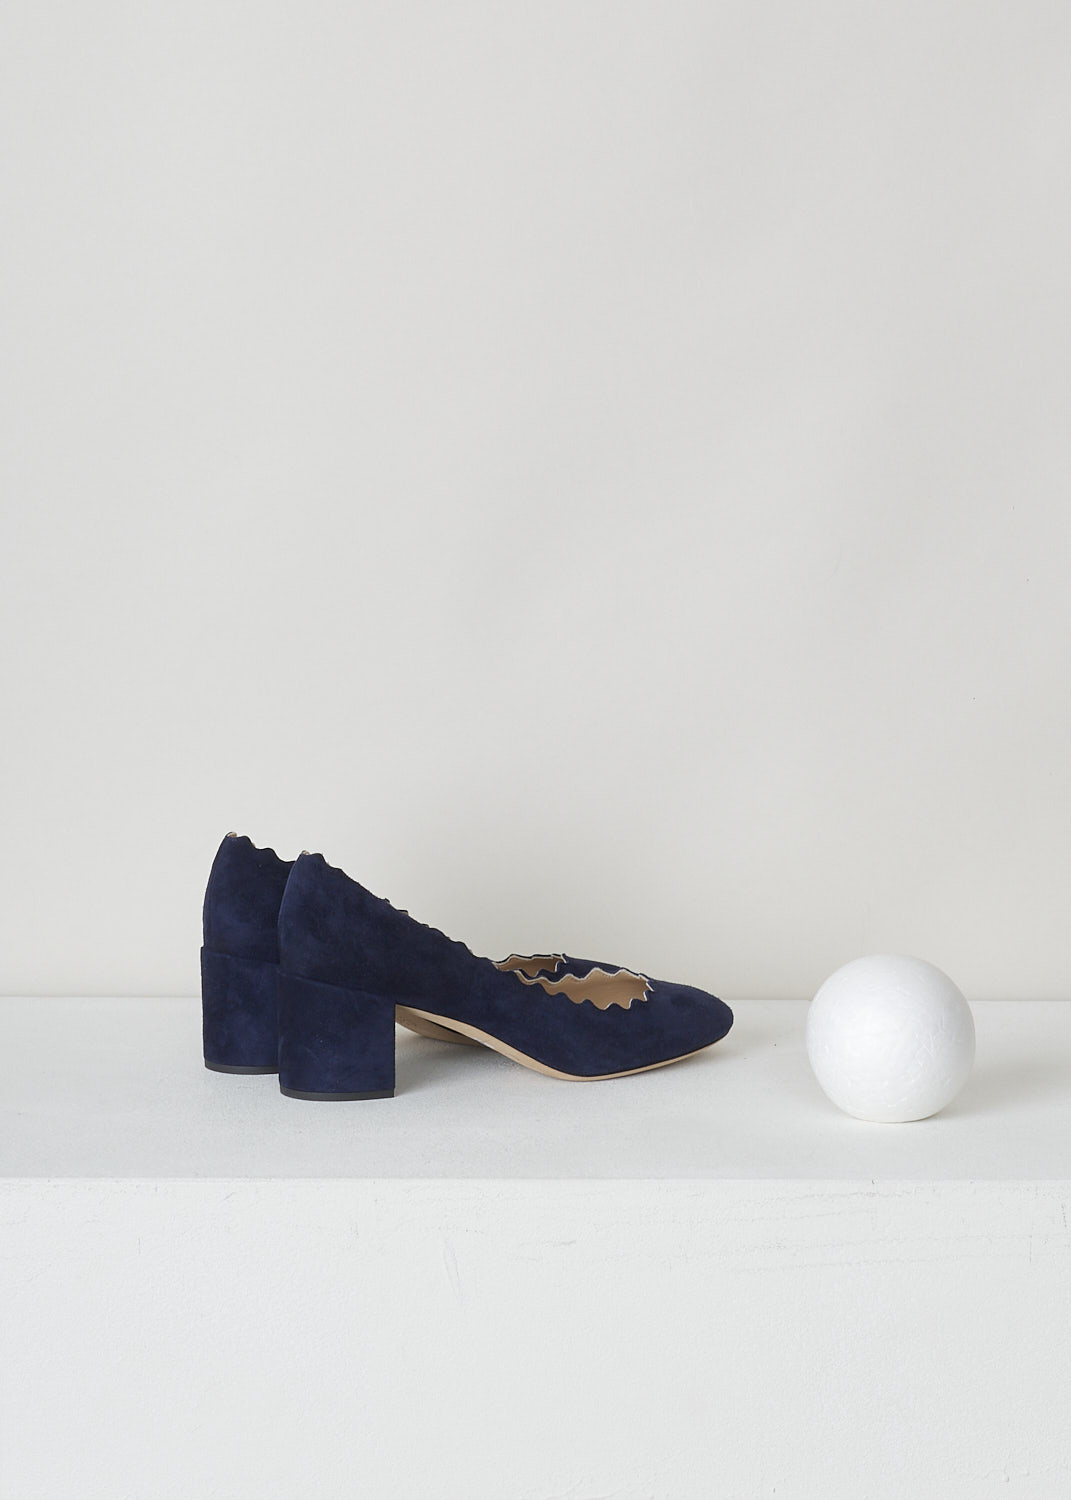 CHLOÃ‰, NAVY BLUE PUMPS WITH SCALLOPED TOPLINE, CH26230_702_BLUE_LAGOON, Blue, Backl, Navy blue suede pumps featuring a chunky heel, round toe vamp and a scalloped top-line. 
